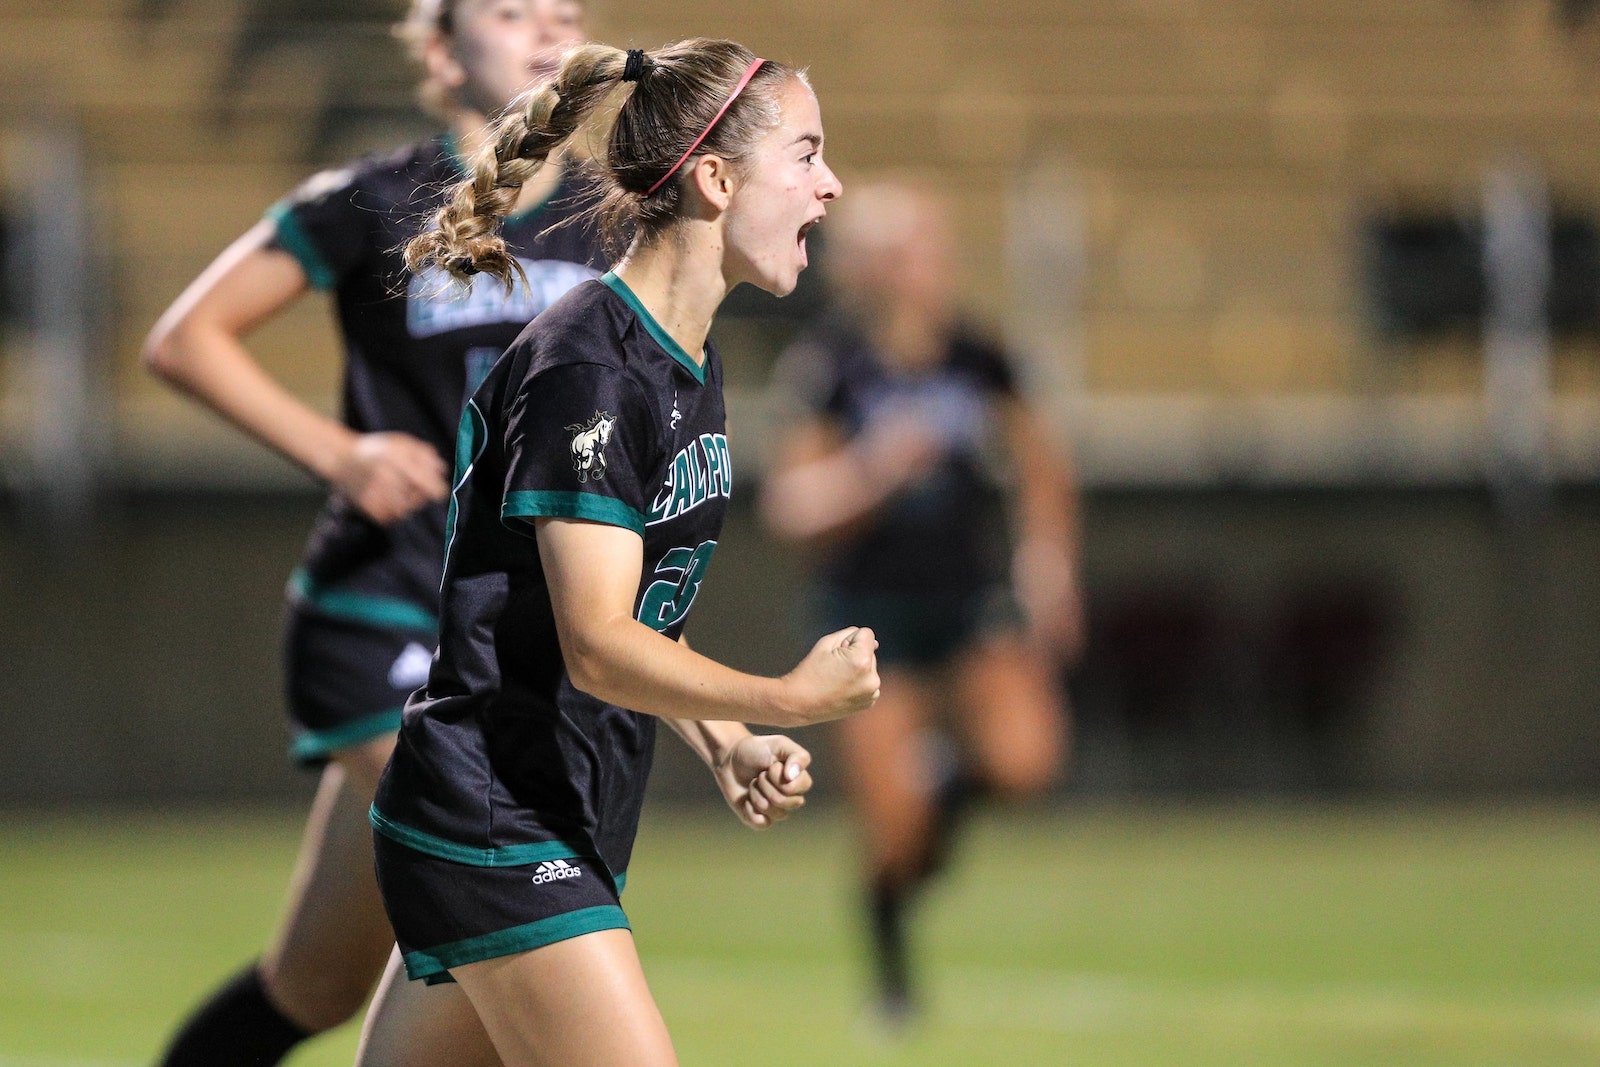 Women's Soccer member shouts with fists pumped to motivate team 